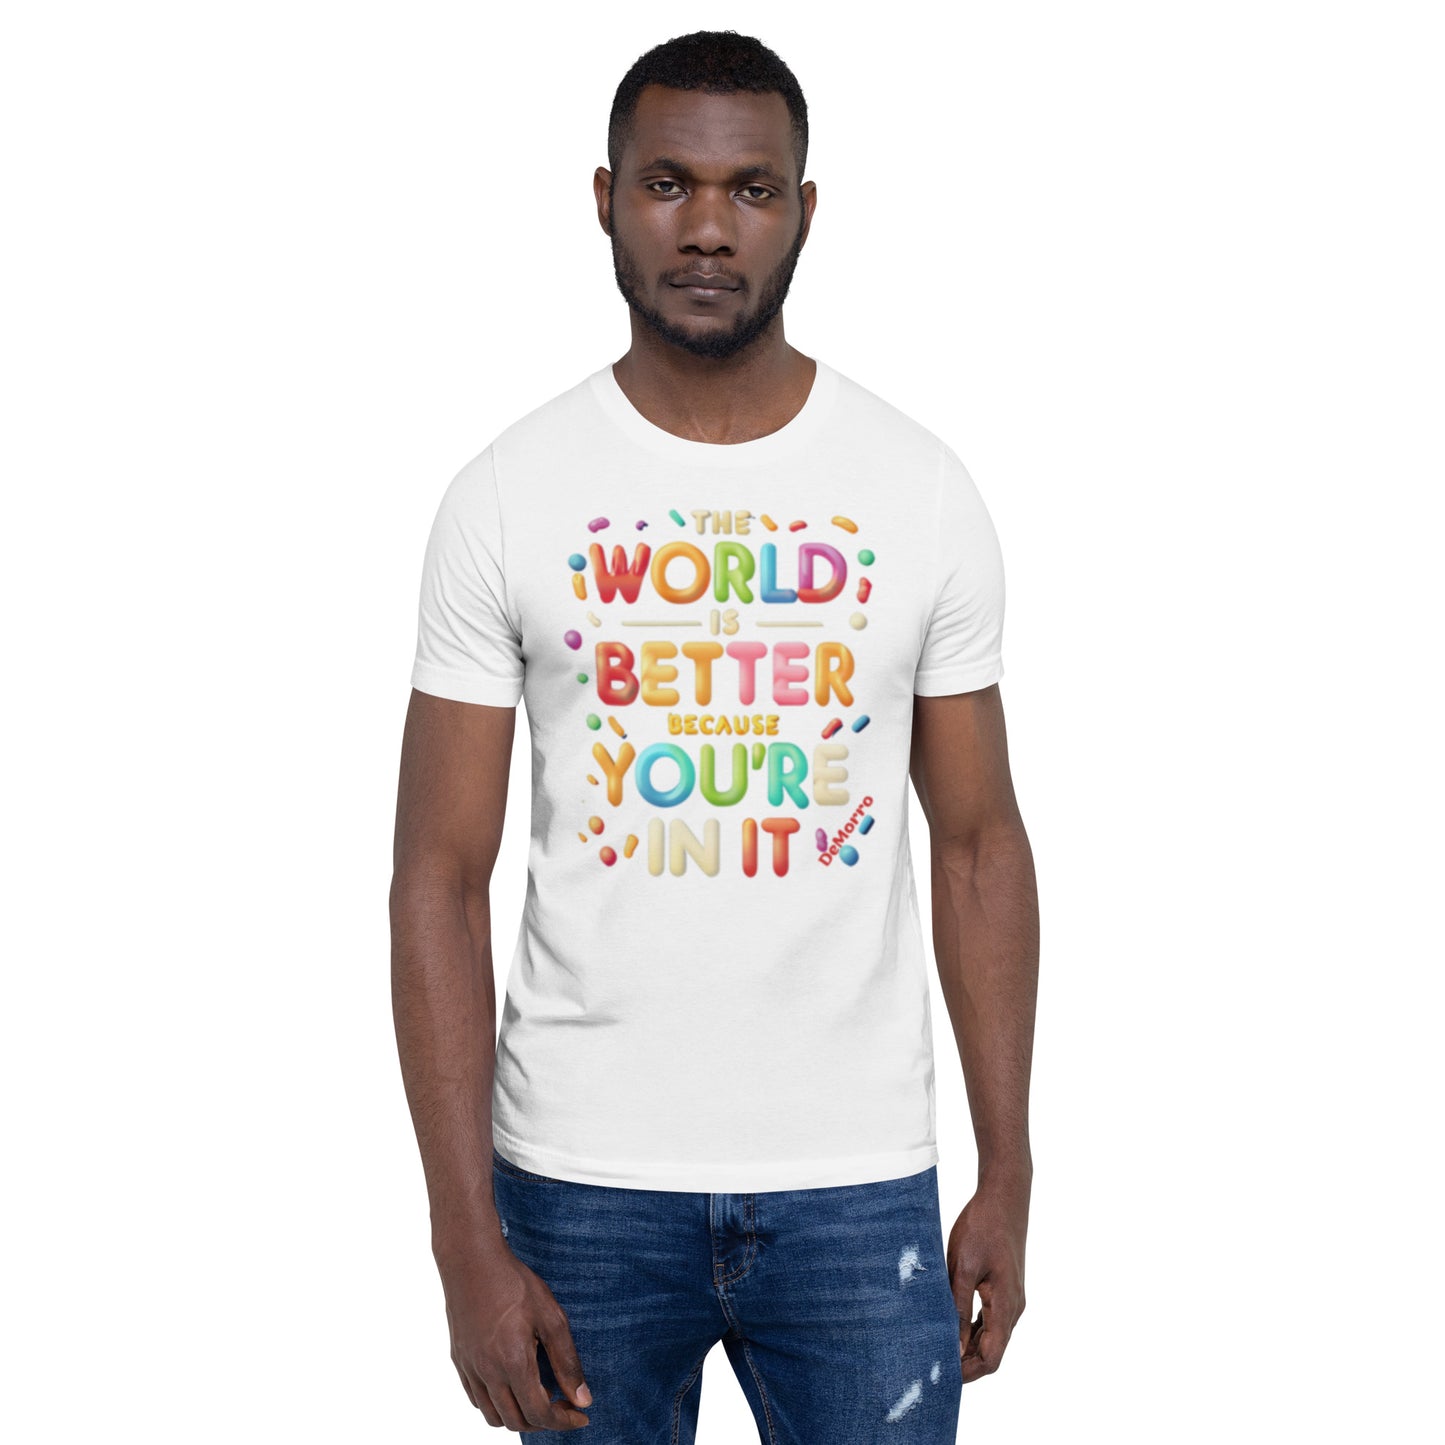 "Better With You" - Unisex t-shirt